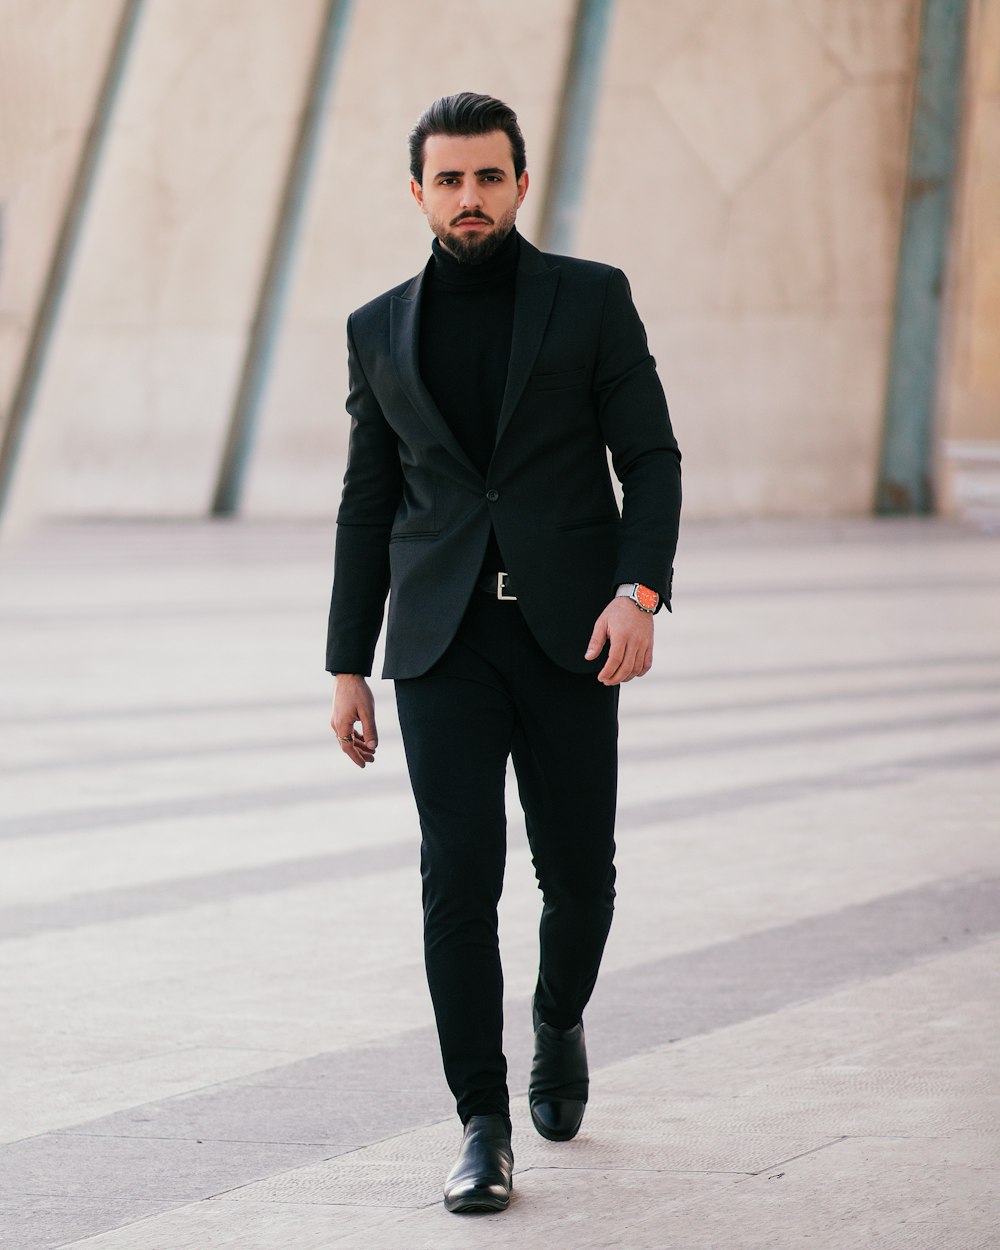 a man in a suit walking down the street